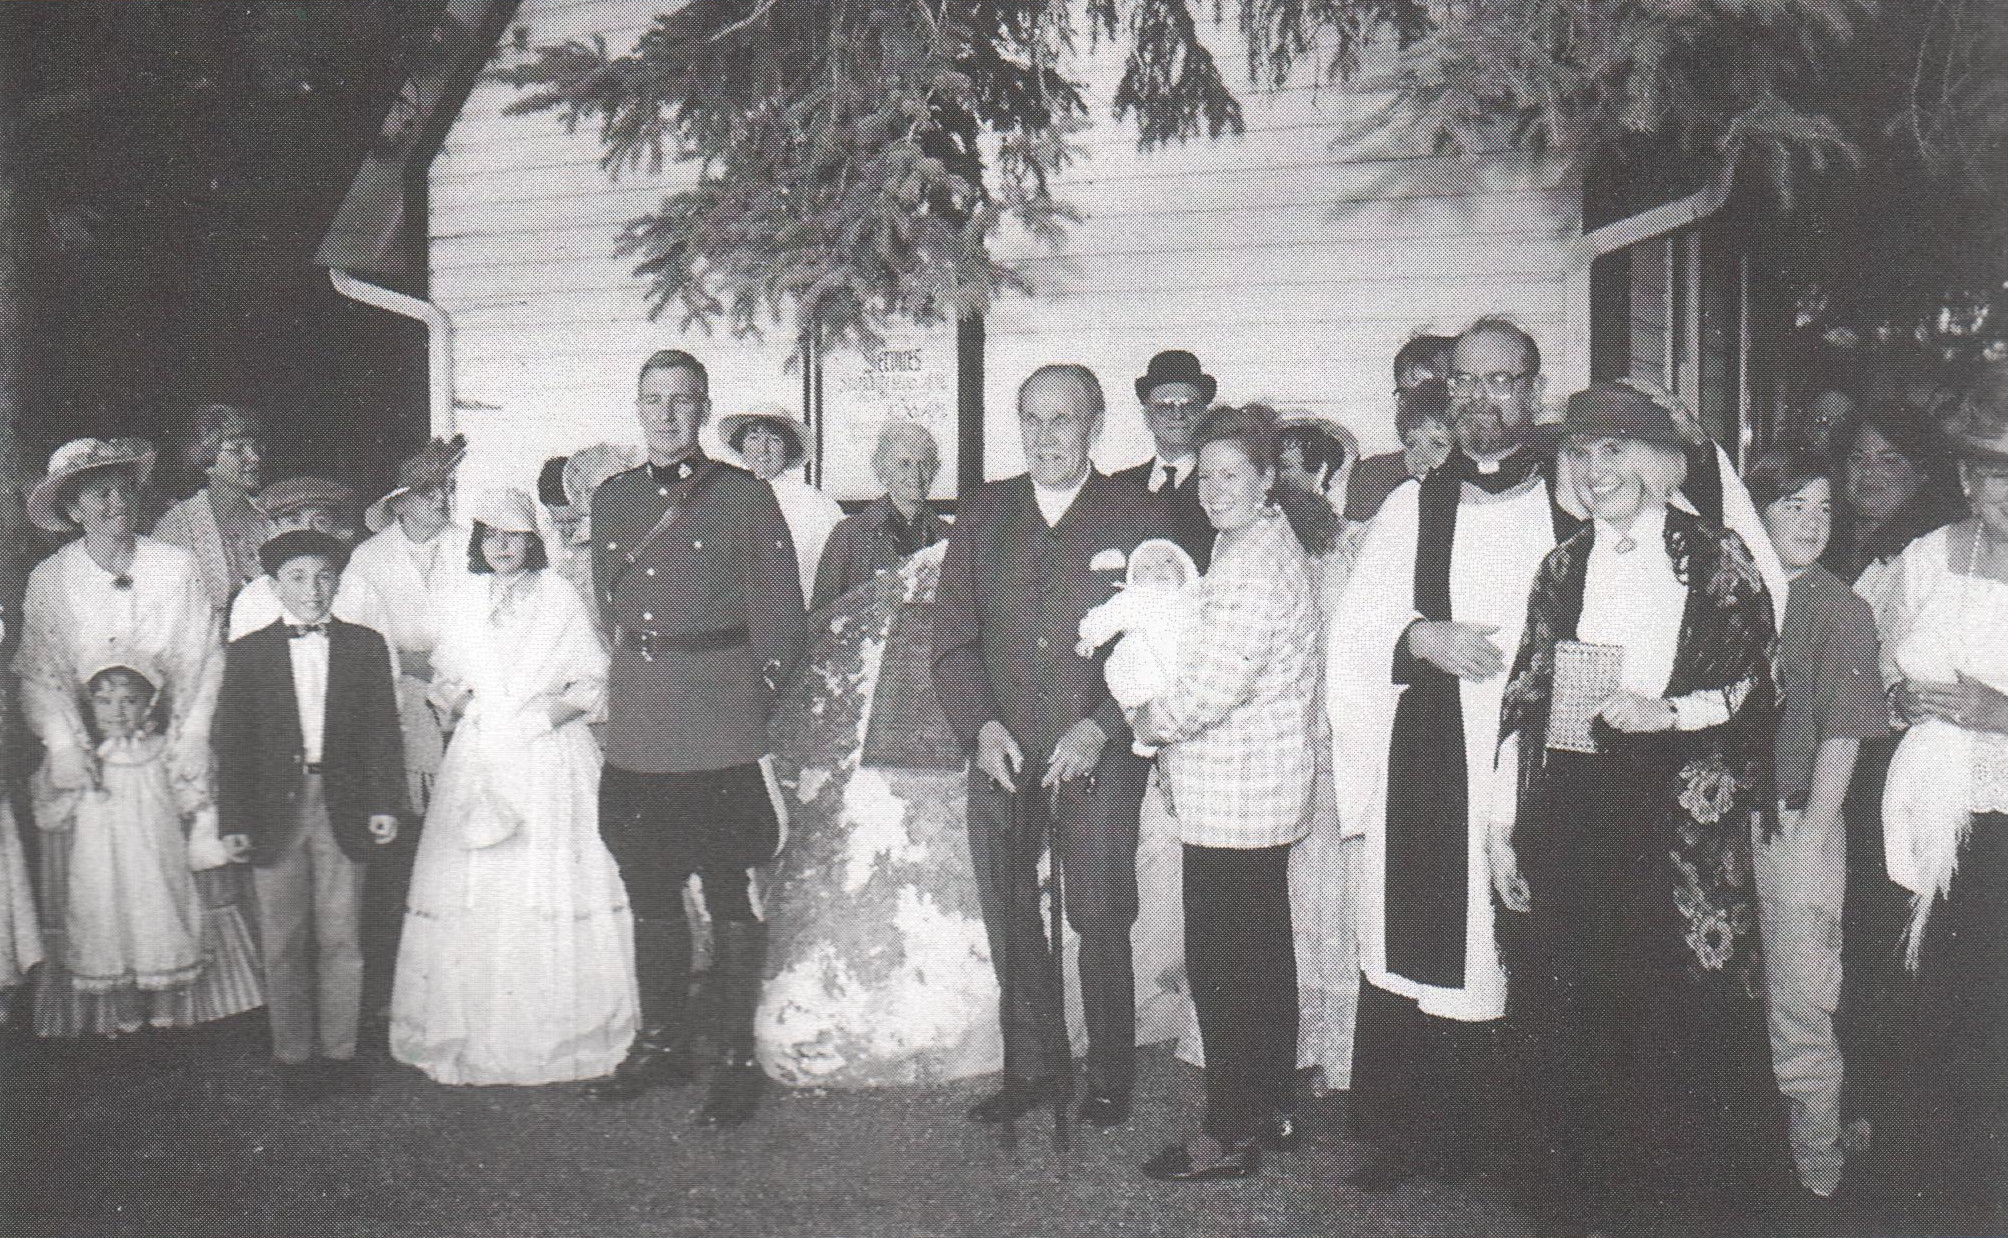 100th Anniversary celebrations in 1992, with Ralph Crittenden and Jim Kerfoot flanking the memorial rock.